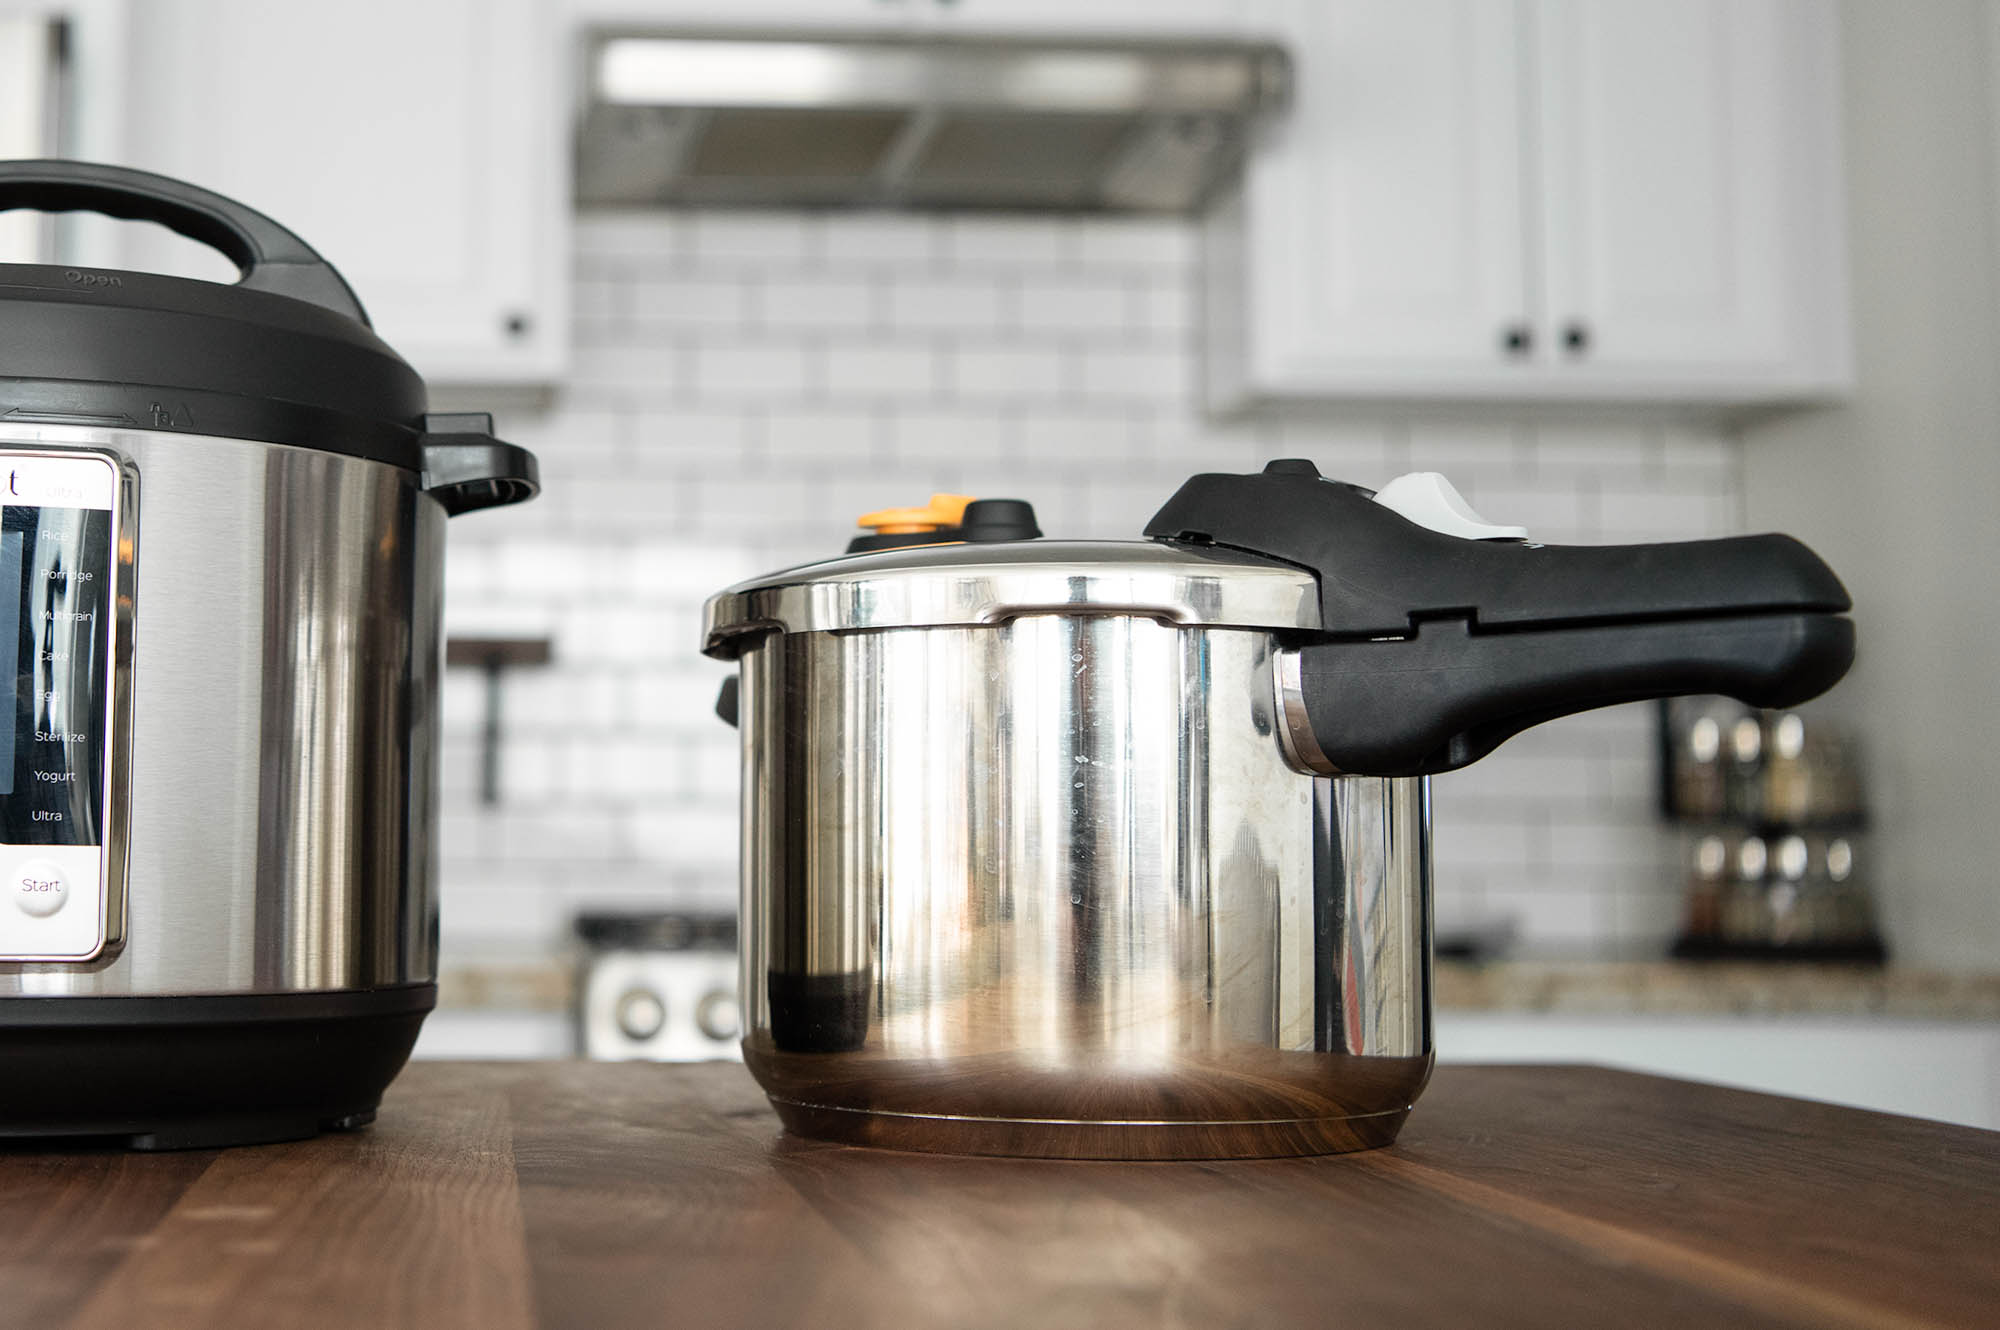 Review: T-Fal 25-in-1 Electric Pressure Cooker